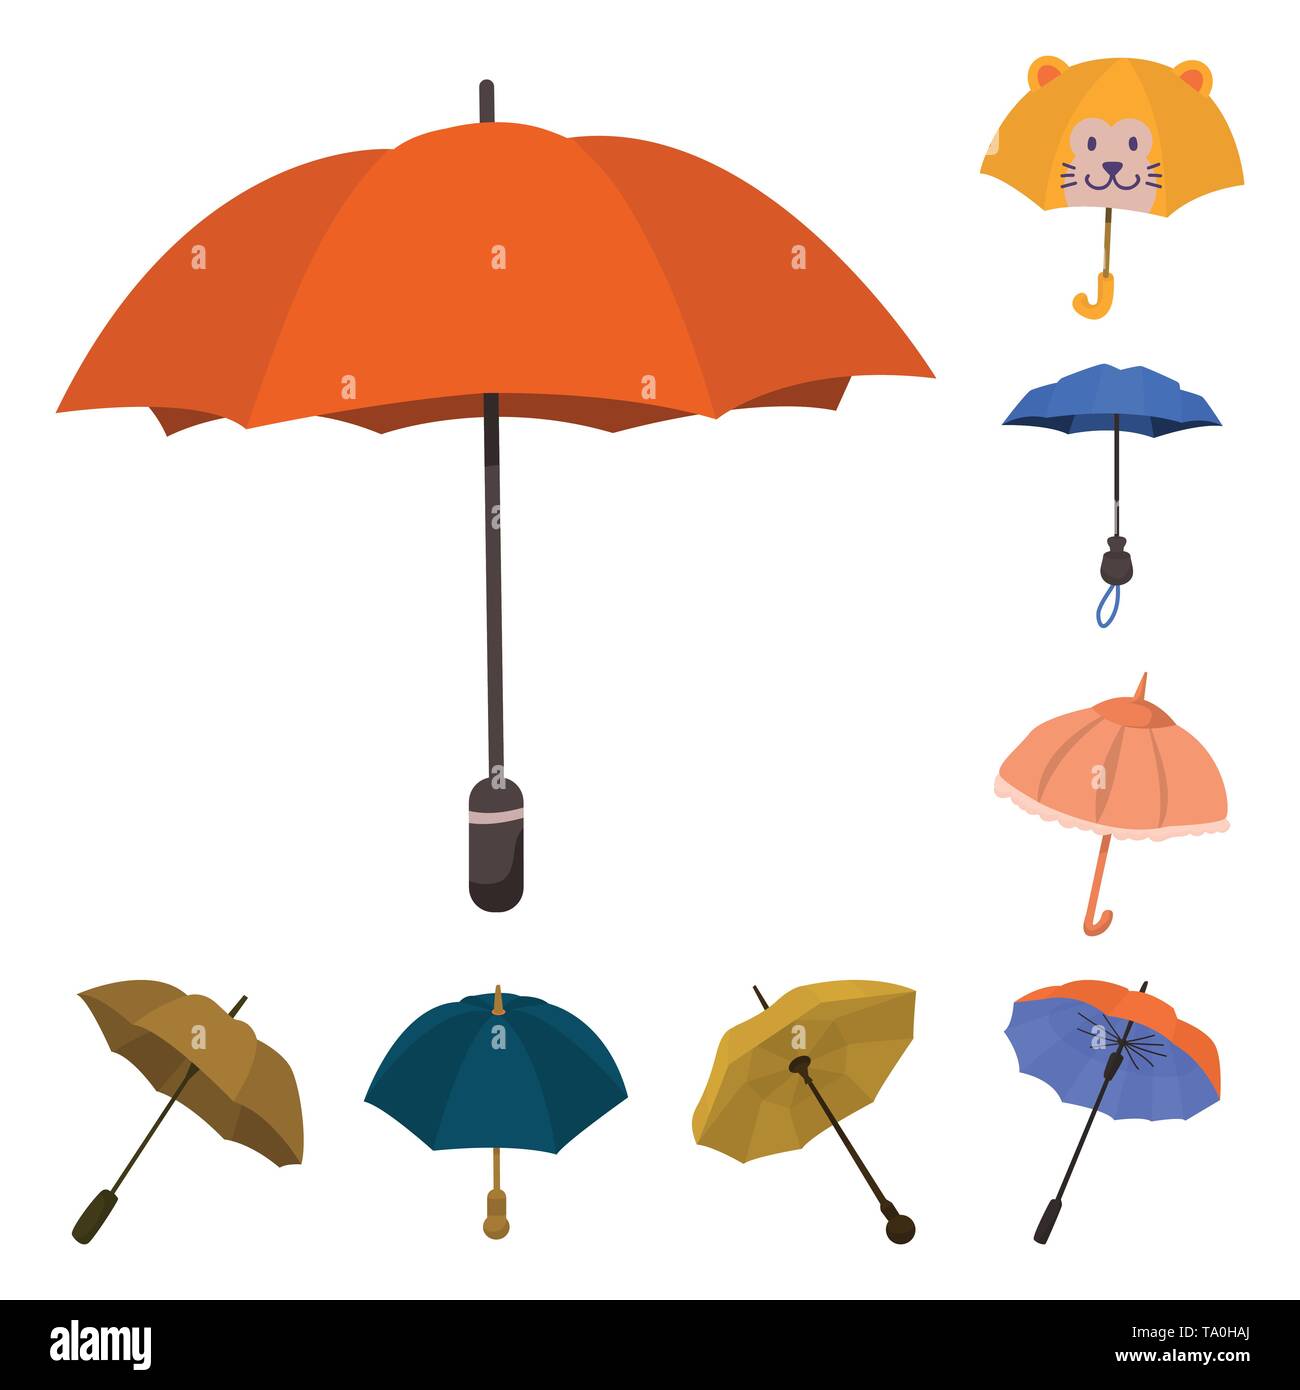 parasol,water,children,coverage,autumn,spring,summer,support,blue,storm,yellow,colorful,classic,shadow,monsoon,insurance,meteorology,climate,blank,orange,canopy,umbrella,rain,season,weather,rainy,open,protection,closed,fashion,safety,set,vector,icon  ...